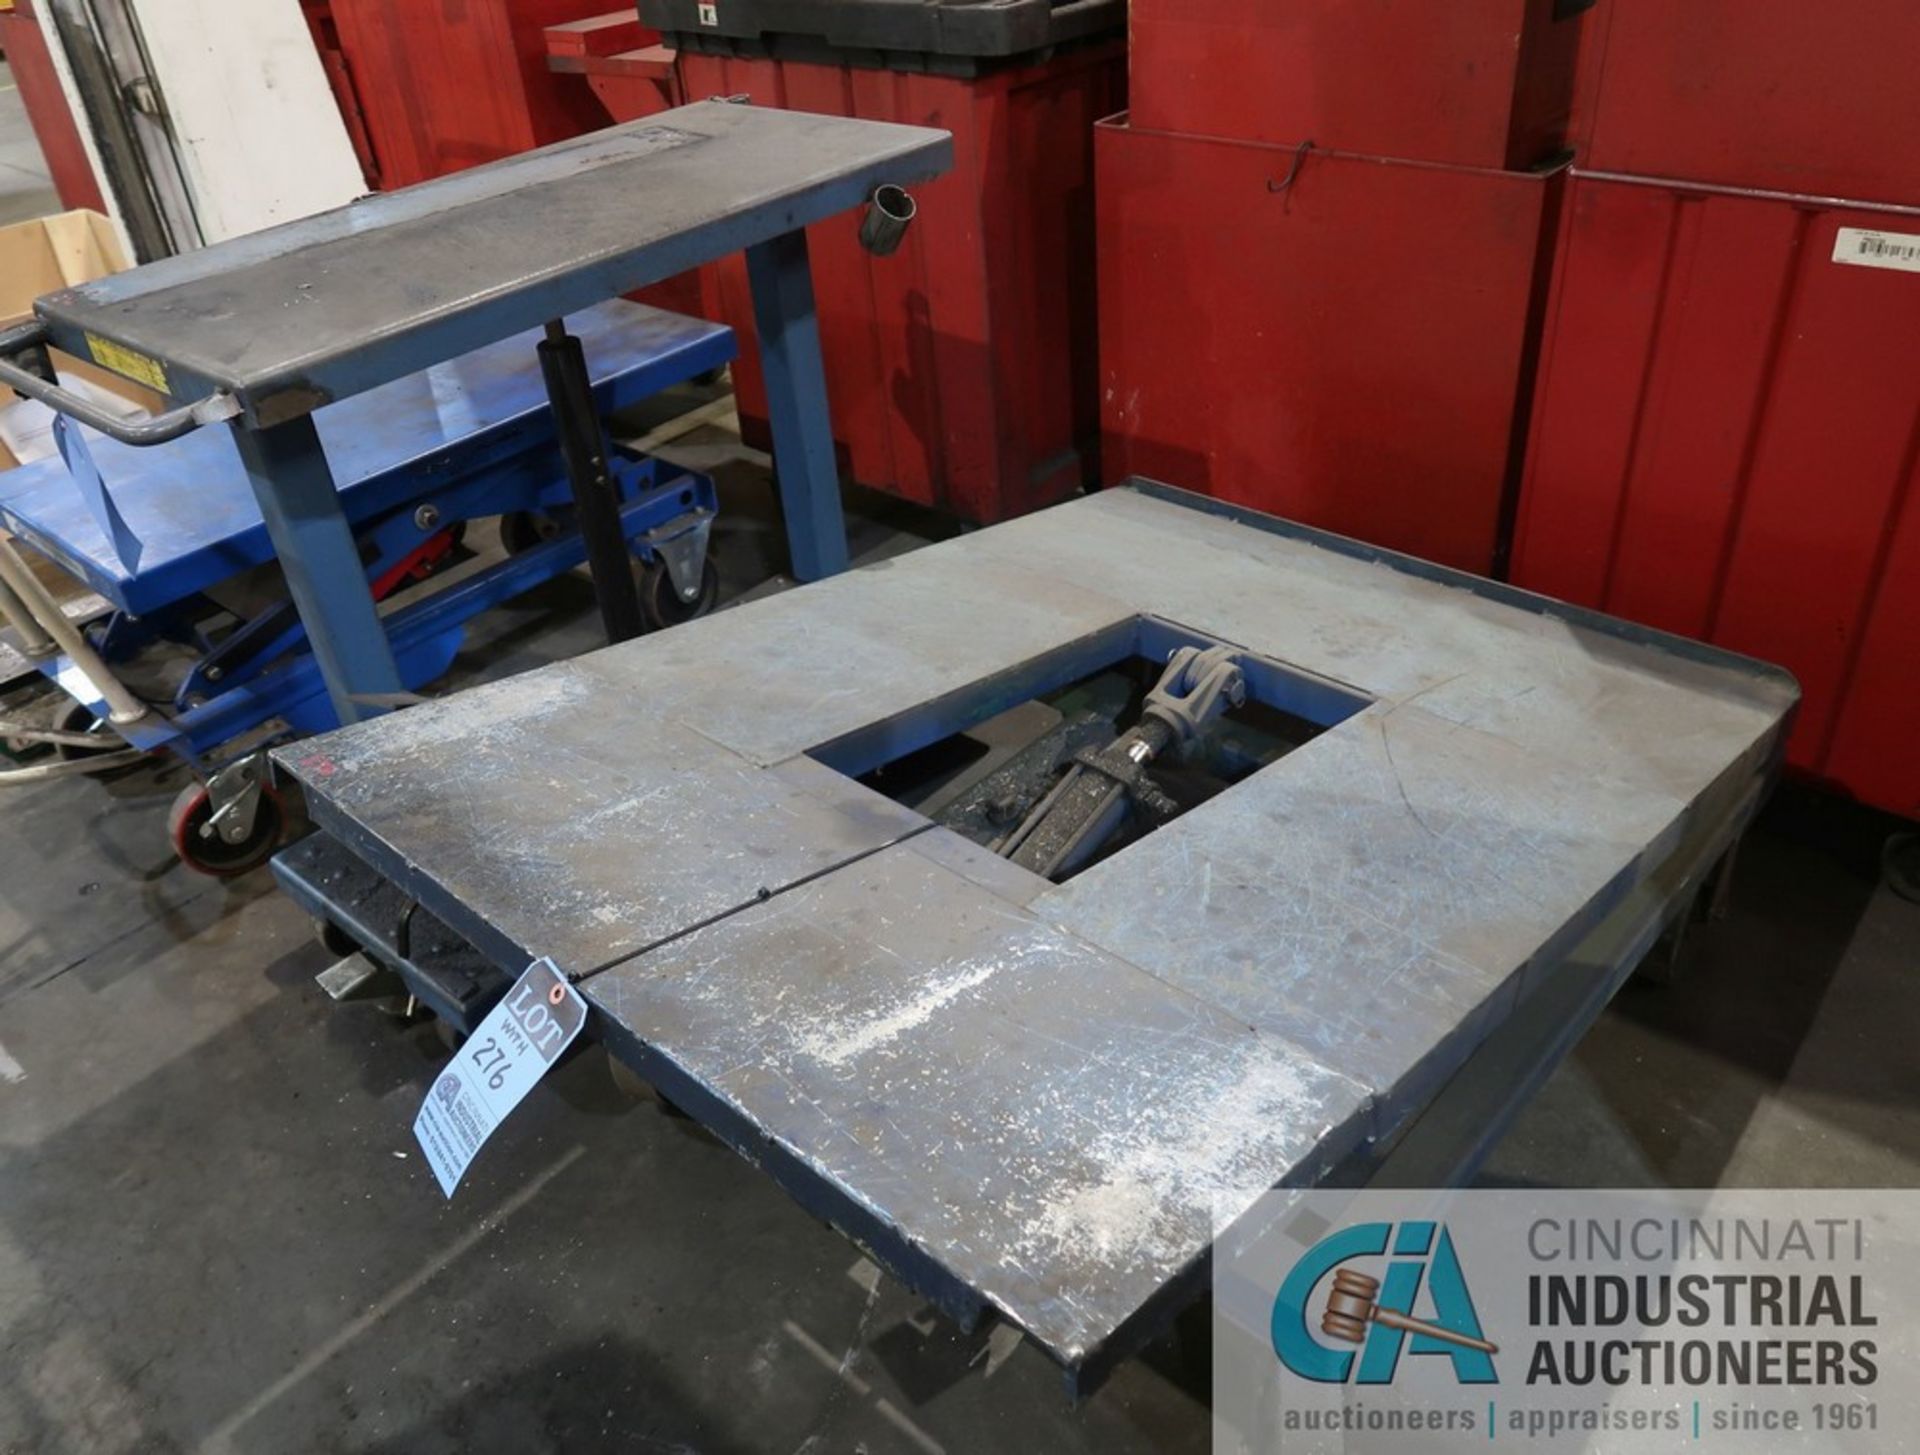 CAPACITY UNKNOWN MANUAL HYDRAULIC LIFT TABLE WITH MANUAL HYDRAULIC TILT TABLE - Image 2 of 2